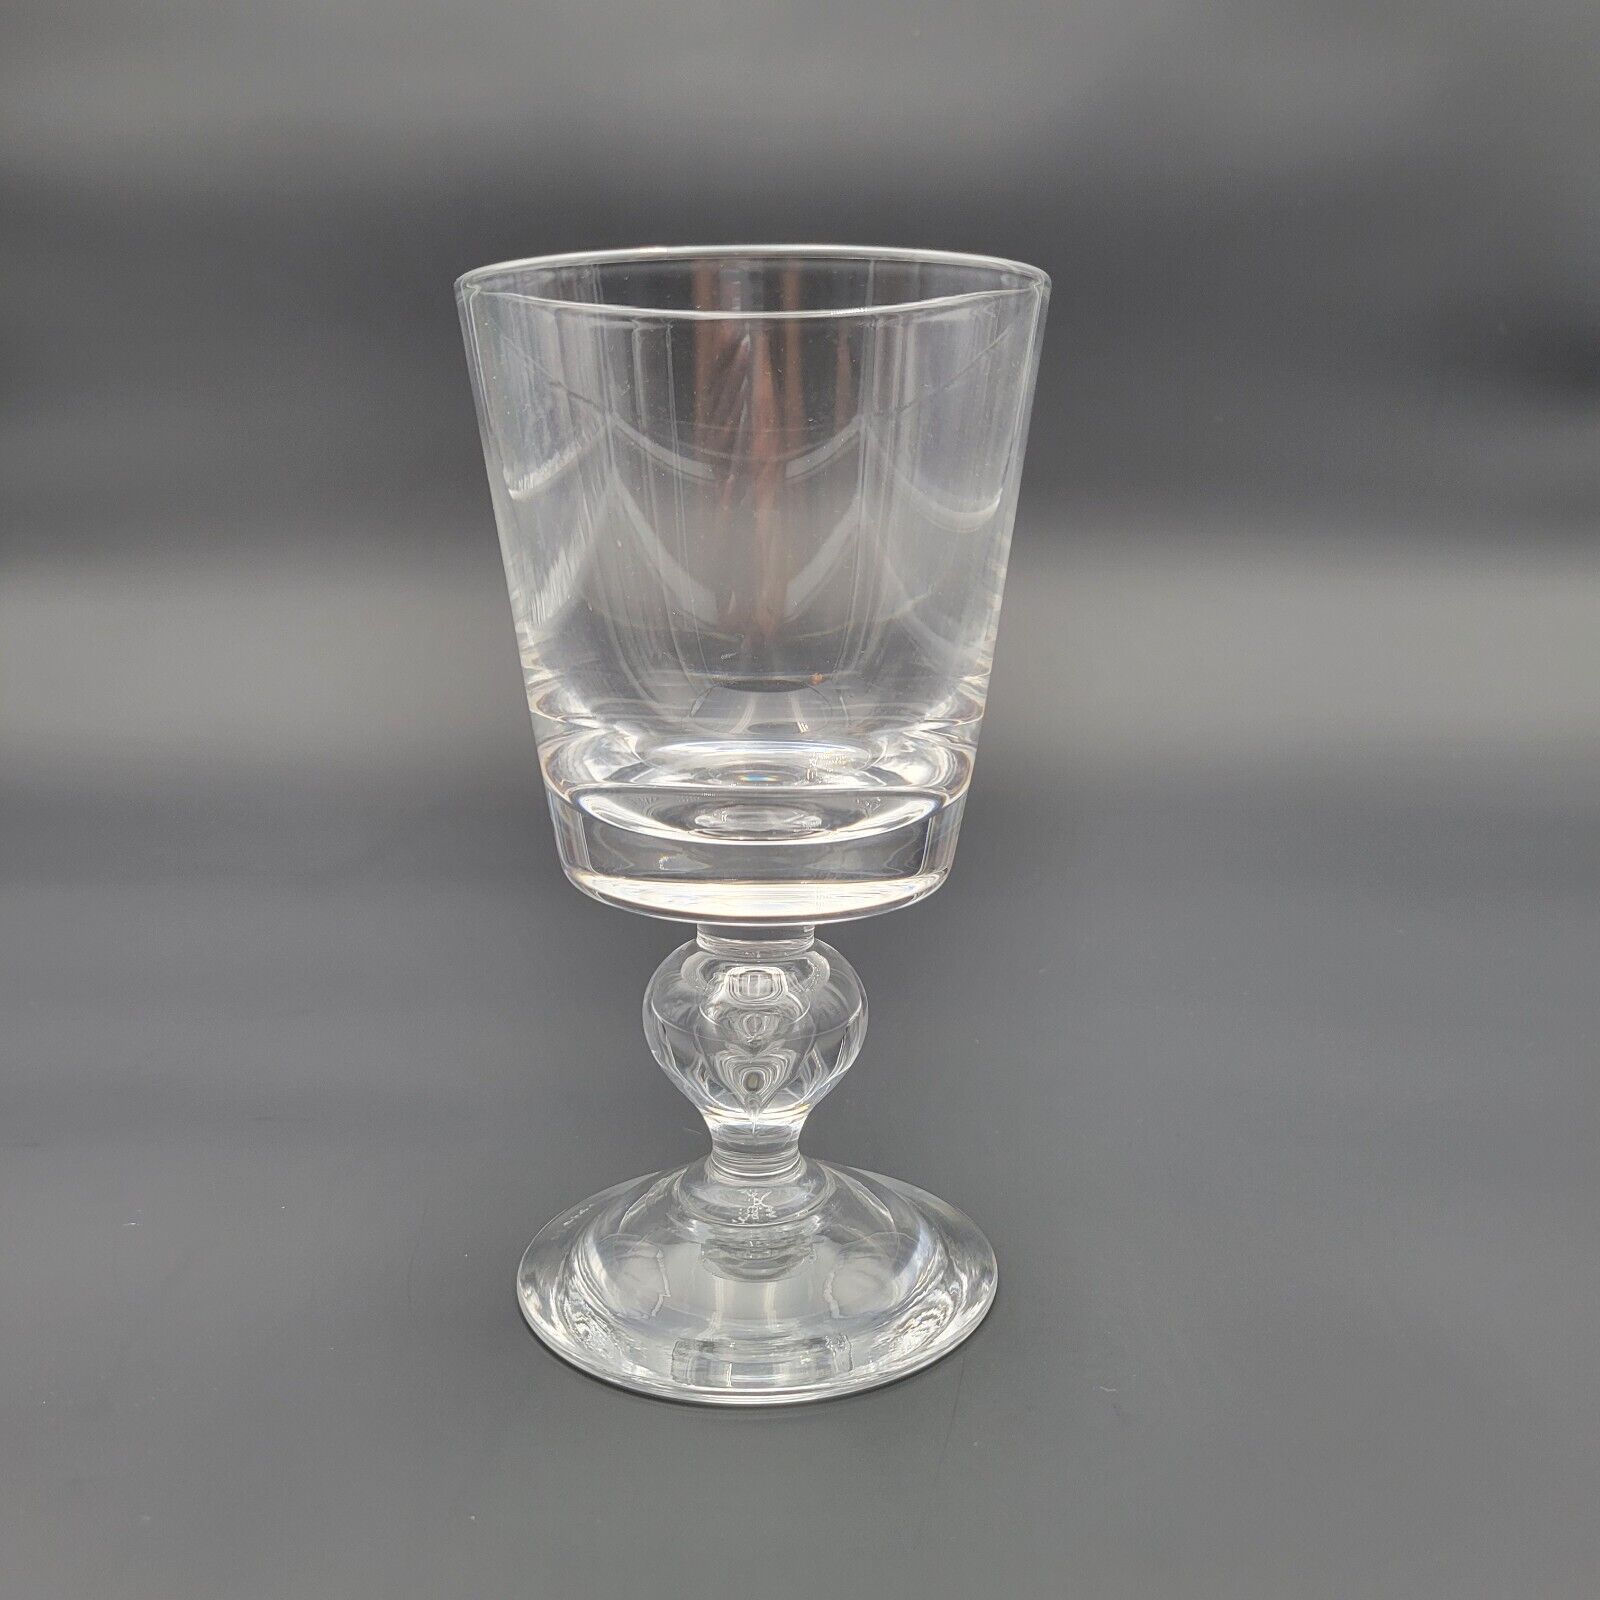 Primary image for Vintage Steuben Baluster Stem Water Glass 7877 approximately 6.75" tall 1940